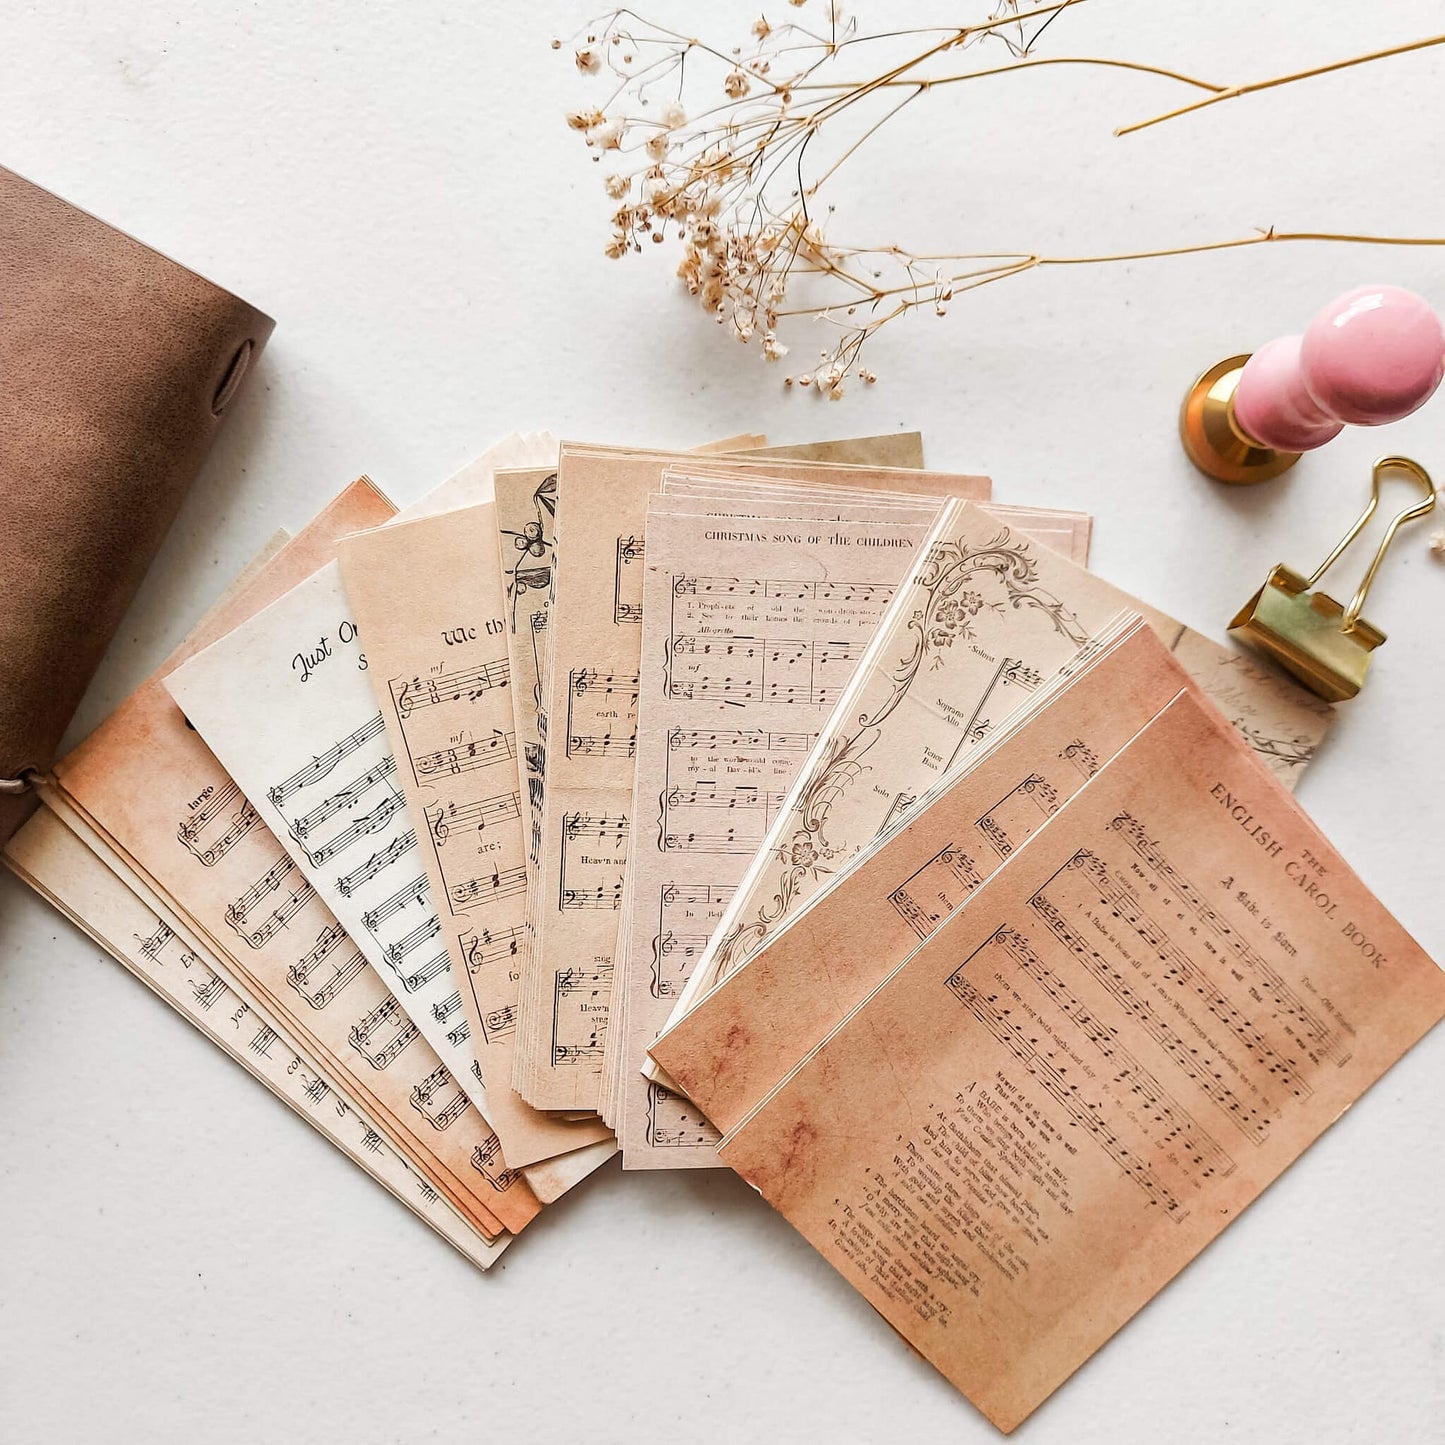 Vintage style paper set - Collected sheet music